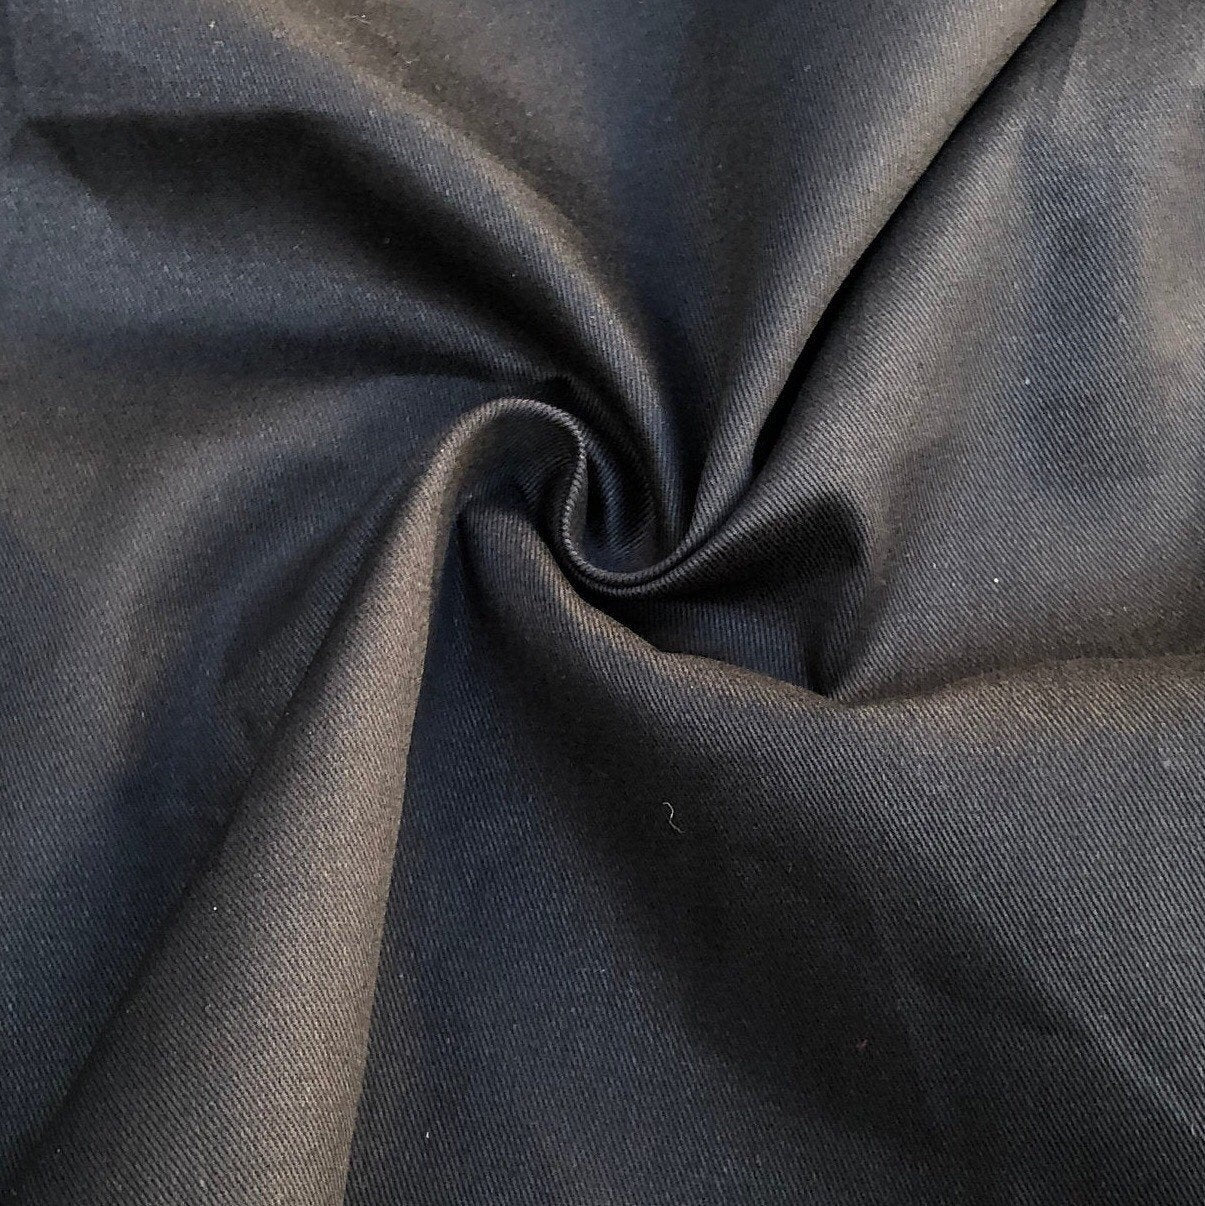 60 100% Cotton Twill 6 OZ Black Apparel Woven Fabric By the Yard